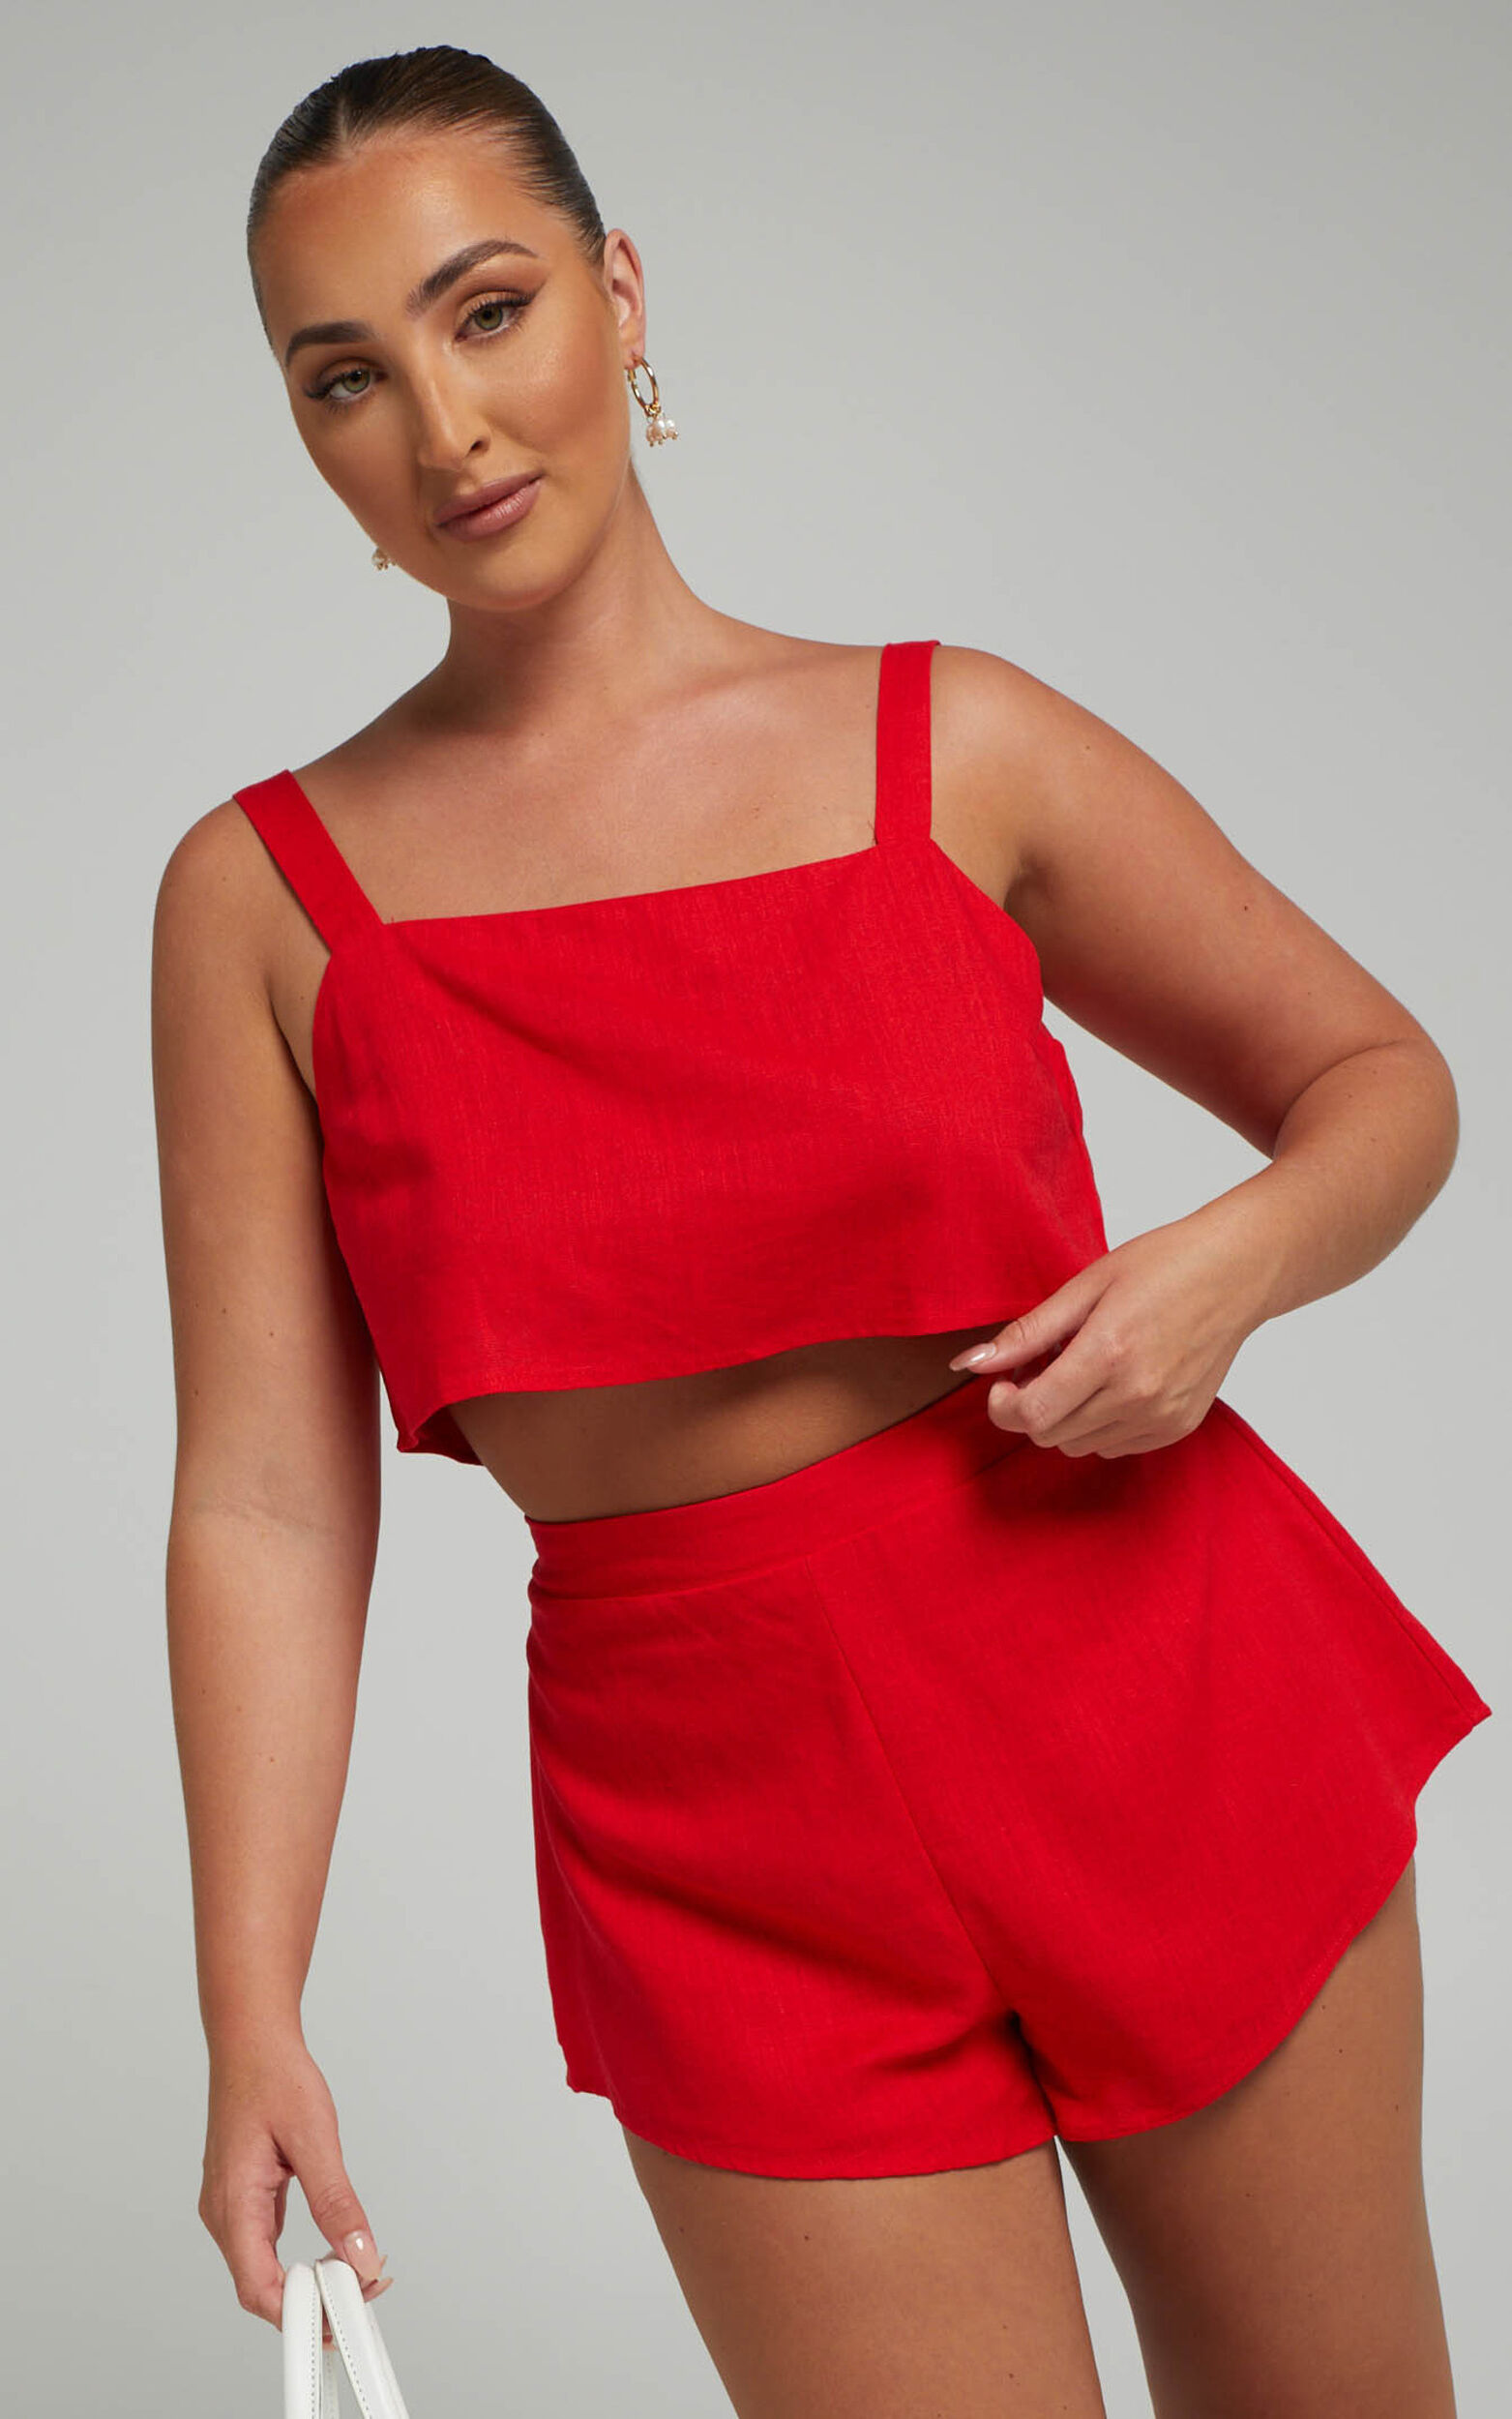 Zanrie Two Piece Set - Linen Look Square Neck Crop Top and High Waist Mini Flare Shorts Set in Red - 04, RED6